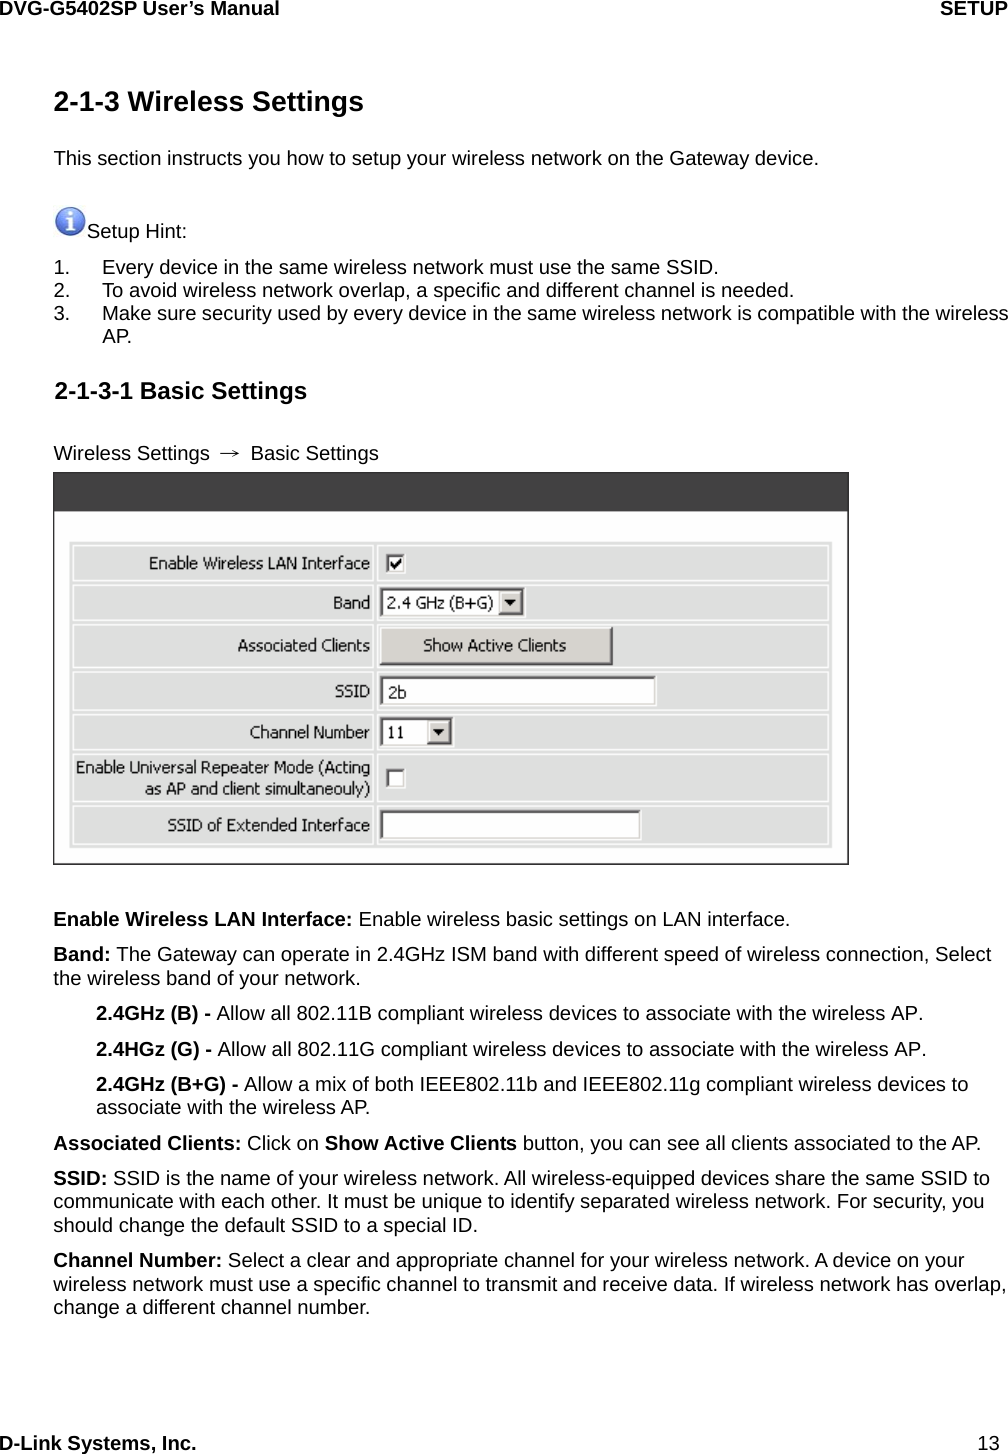 DVG-G5402SP User’s Manual                                   SETUP D-Link Systems, Inc.                                                                             13 2-1-3 Wireless Settings   This section instructs you how to setup your wireless network on the Gateway device.    Setup Hint:   1.  Every device in the same wireless network must use the same SSID.   2.  To avoid wireless network overlap, a specific and different channel is needed. 3.  Make sure security used by every device in the same wireless network is compatible with the wireless AP.  2-1-3-1 Basic Settings  Wireless Settings  → Basic Settings   Enable Wireless LAN Interface: Enable wireless basic settings on LAN interface.   Band: The Gateway can operate in 2.4GHz ISM band with different speed of wireless connection, Select the wireless band of your network. 2.4GHz (B) - Allow all 802.11B compliant wireless devices to associate with the wireless AP. 2.4HGz (G) - Allow all 802.11G compliant wireless devices to associate with the wireless AP. 2.4GHz (B+G) - Allow a mix of both IEEE802.11b and IEEE802.11g compliant wireless devices to associate with the wireless AP. Associated Clients: Click on Show Active Clients button, you can see all clients associated to the AP. SSID: SSID is the name of your wireless network. All wireless-equipped devices share the same SSID to communicate with each other. It must be unique to identify separated wireless network. For security, you should change the default SSID to a special ID. Channel Number: Select a clear and appropriate channel for your wireless network. A device on your wireless network must use a specific channel to transmit and receive data. If wireless network has overlap, change a different channel number.  